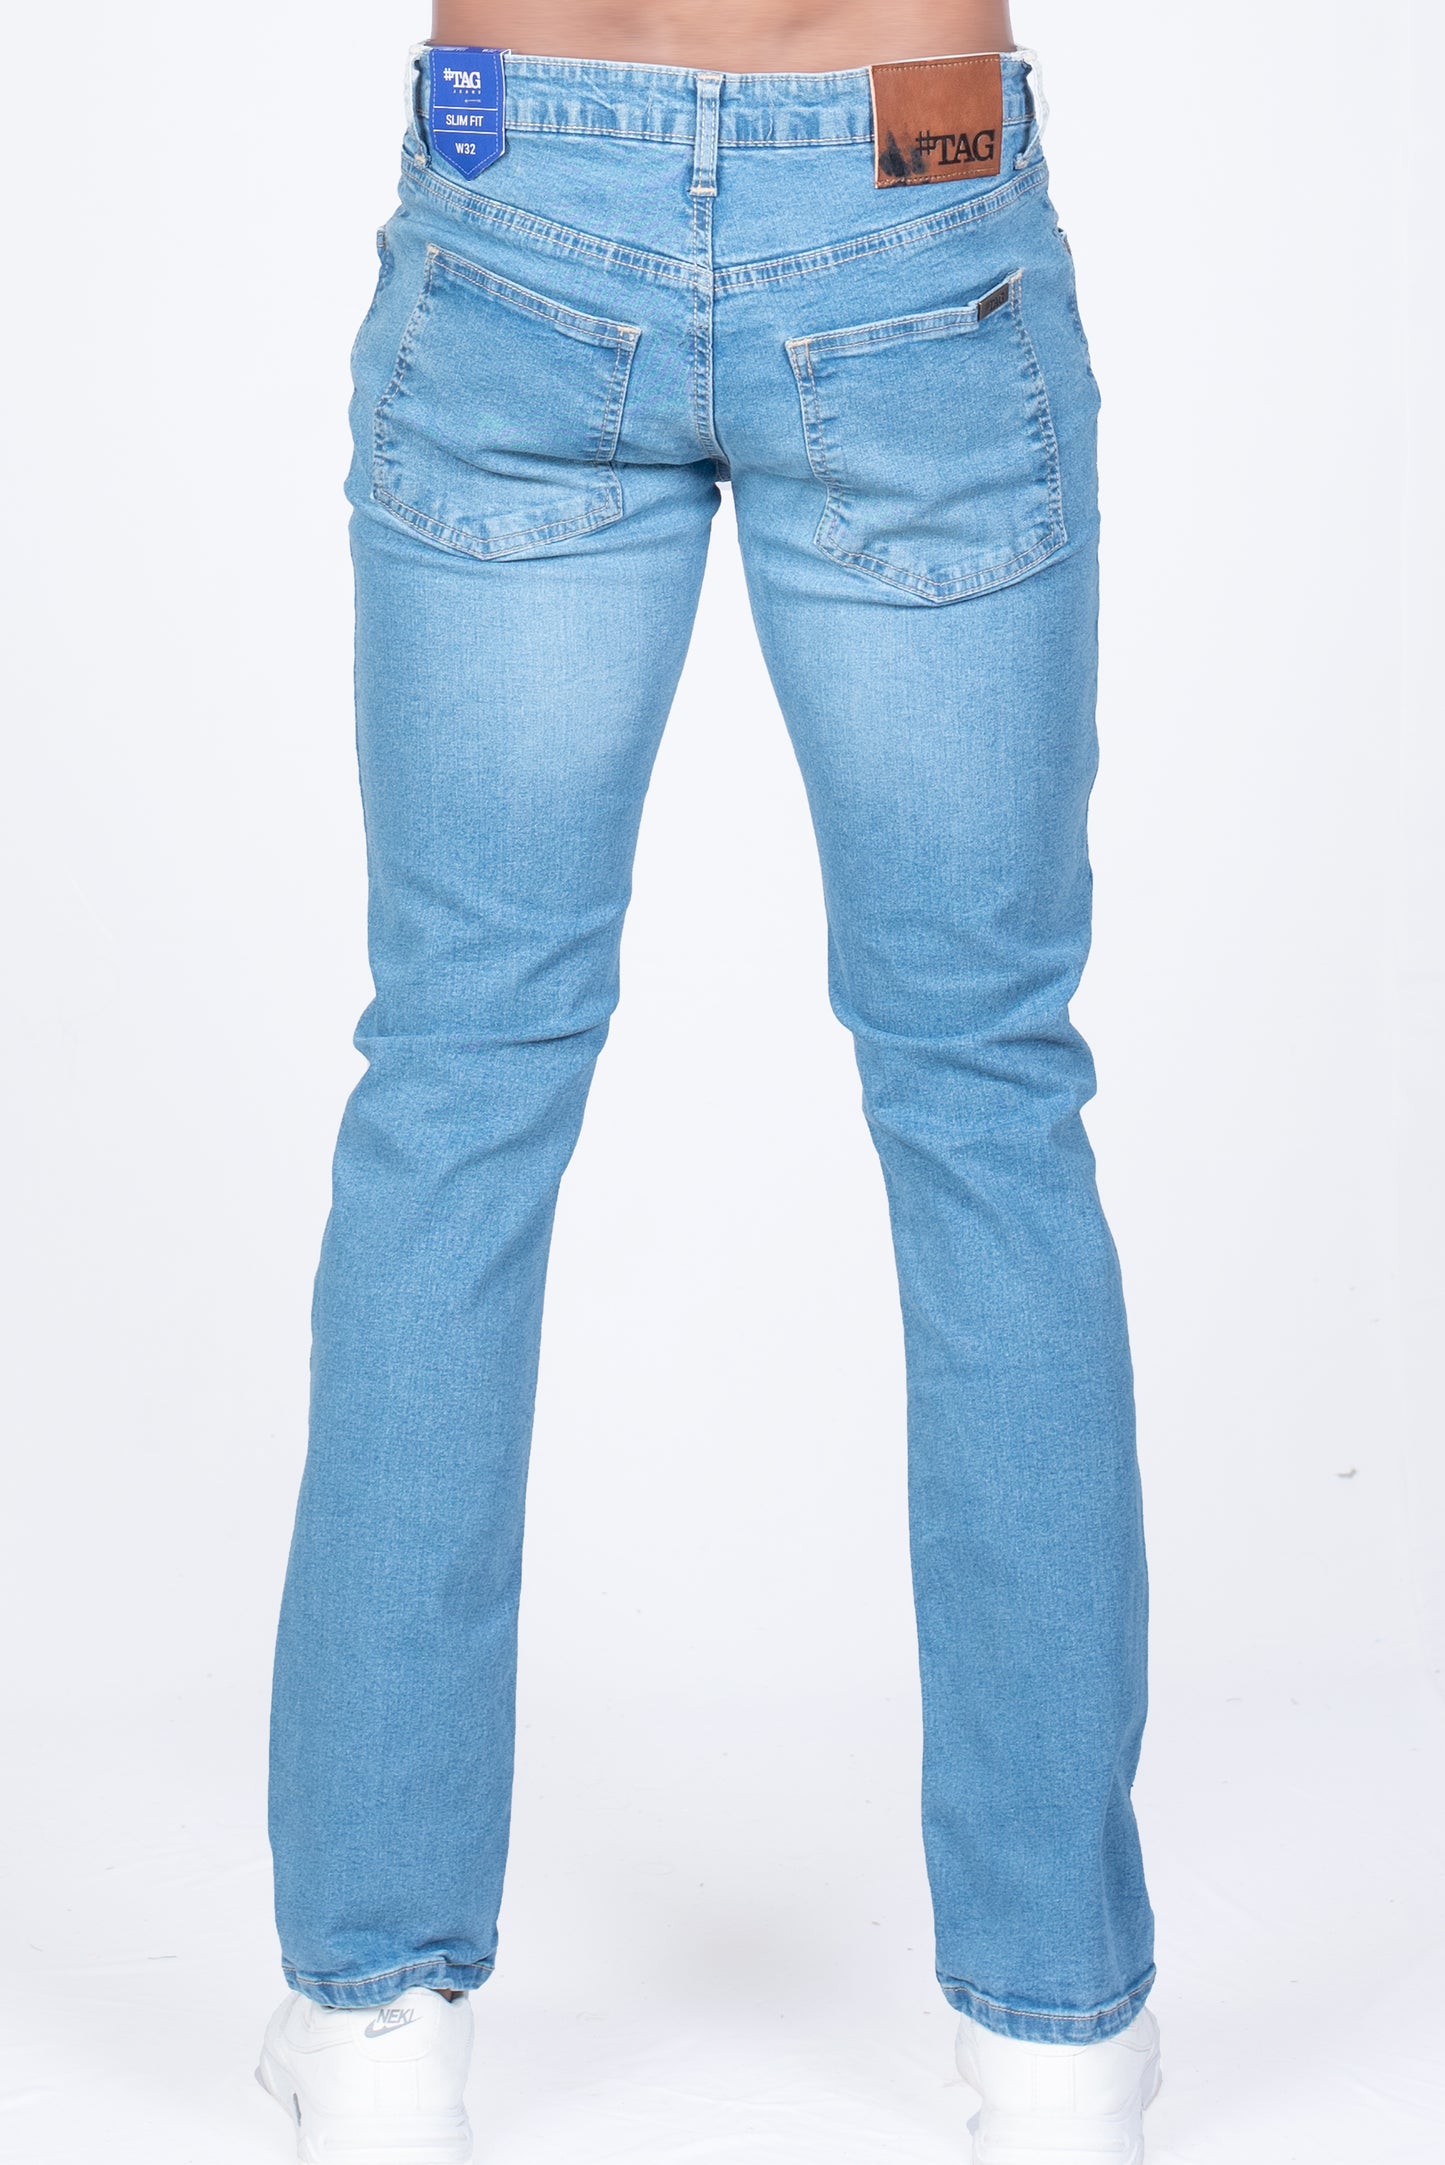 Men's Tooled Detailed Slim Fit Jeans in Ice Blue Wash